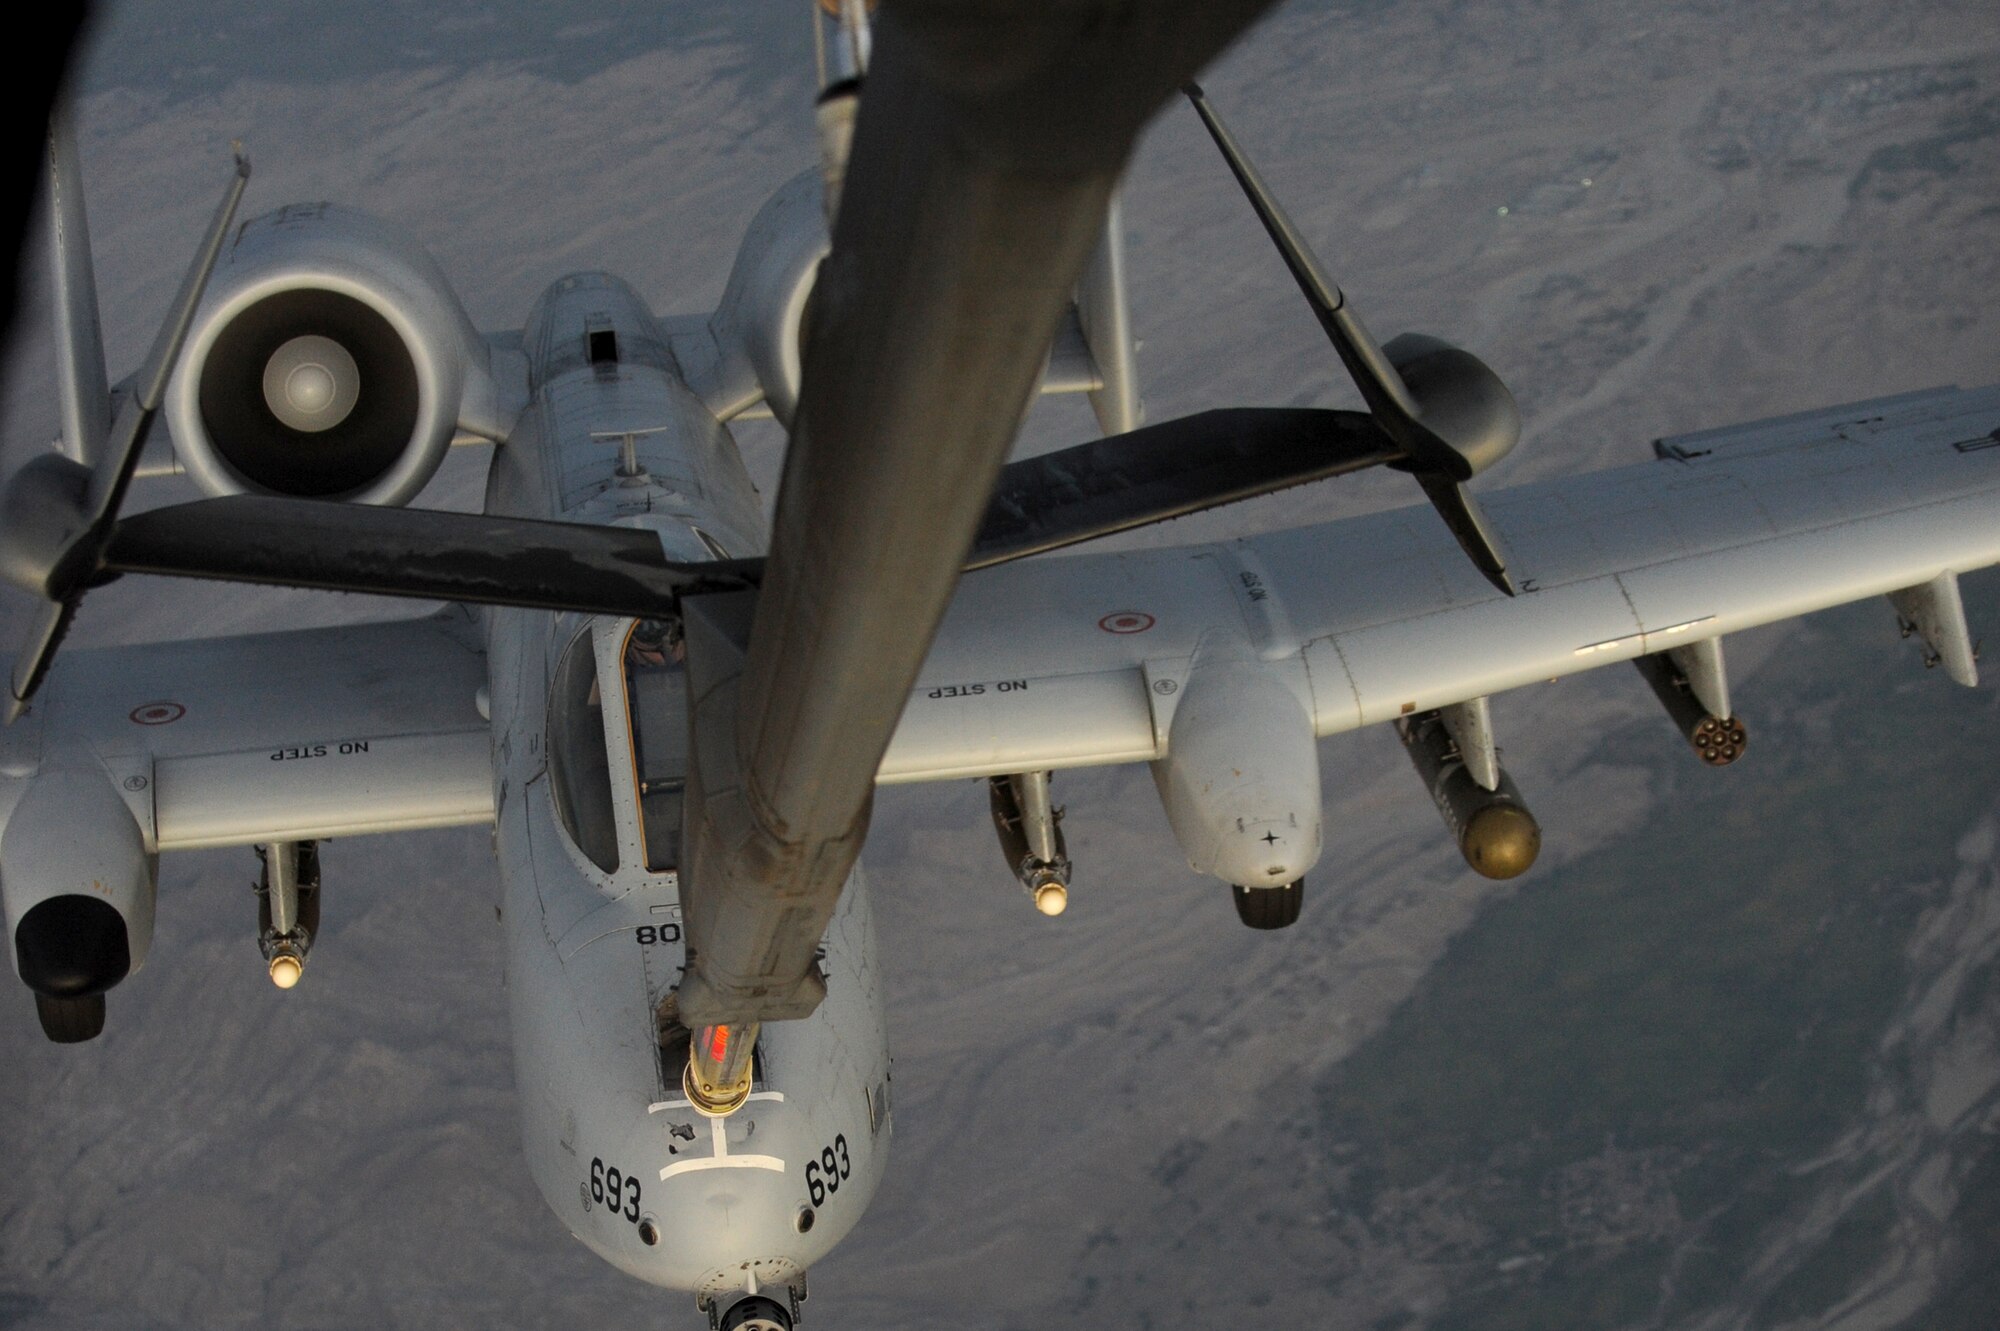 SOUTHWEST ASIA - An A-10 Warthog pulls up behind a KC-10 Extender to be refueled Sept. 18, 2012. The KC-10 is an advanced tanker and cargo aircraft designed to provide increased global mobility for U.S. armed forces. (U.S. Air Force photo/Master Sgt. Scott MacKay)